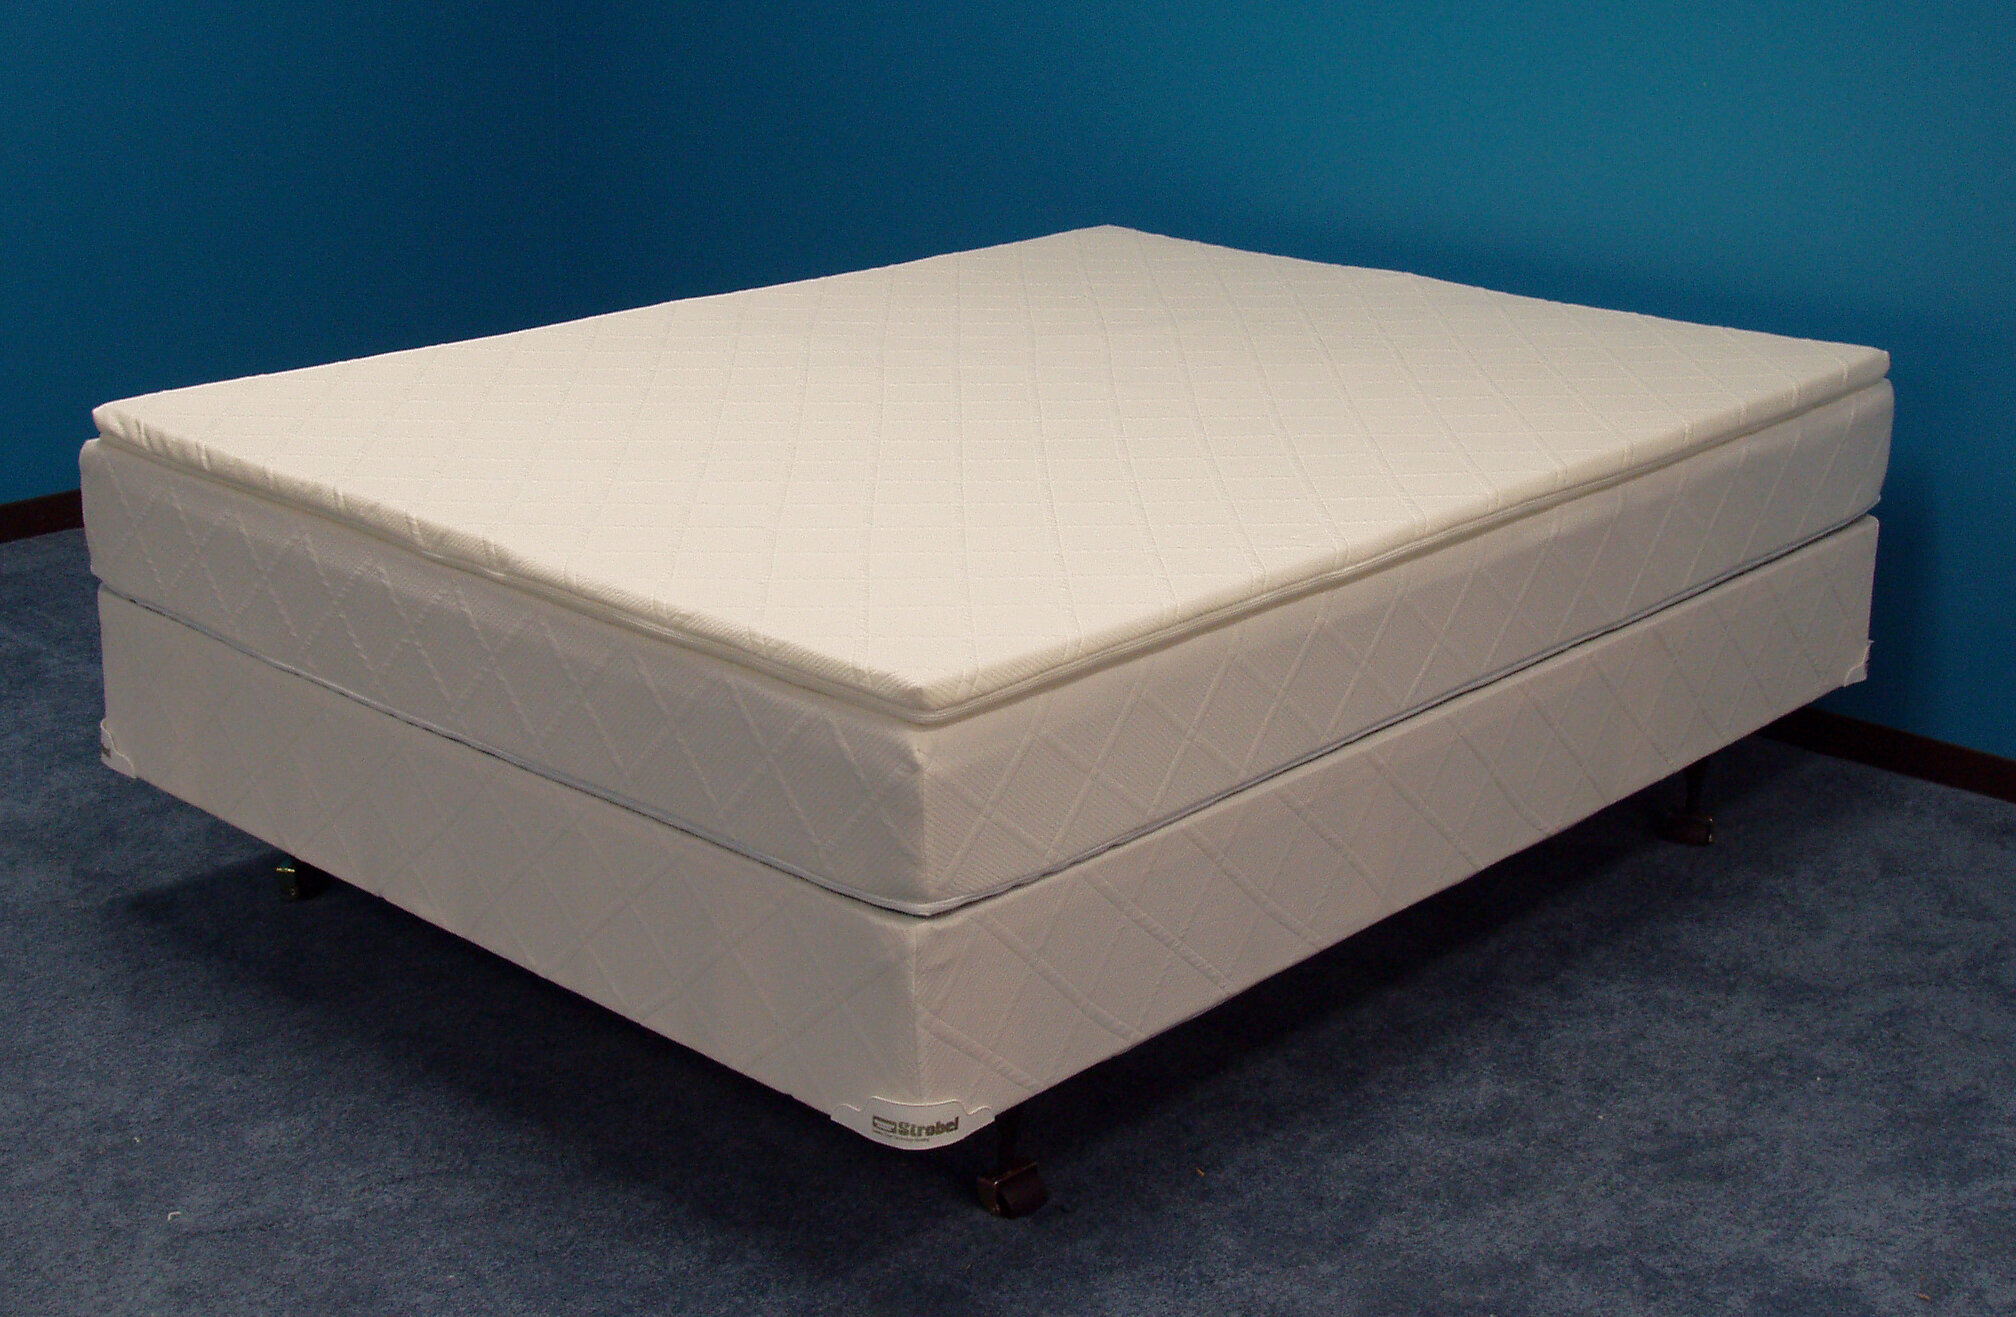 waterbed mattress reviews strobel boyd and sterling